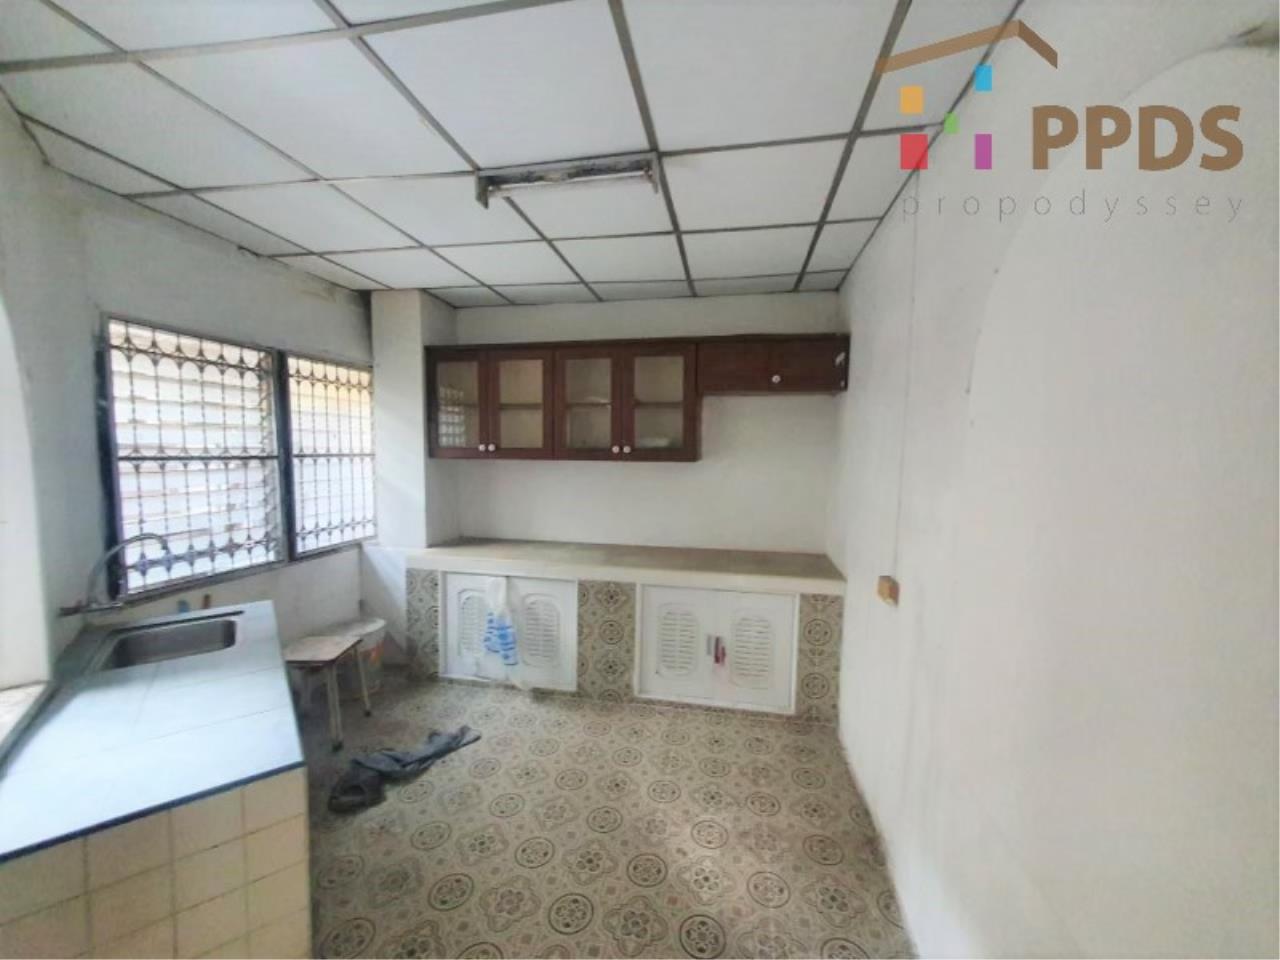 Townhouse for sale Sukhumvit 71 Pridi – old and need renovation, ภาพที่ 4